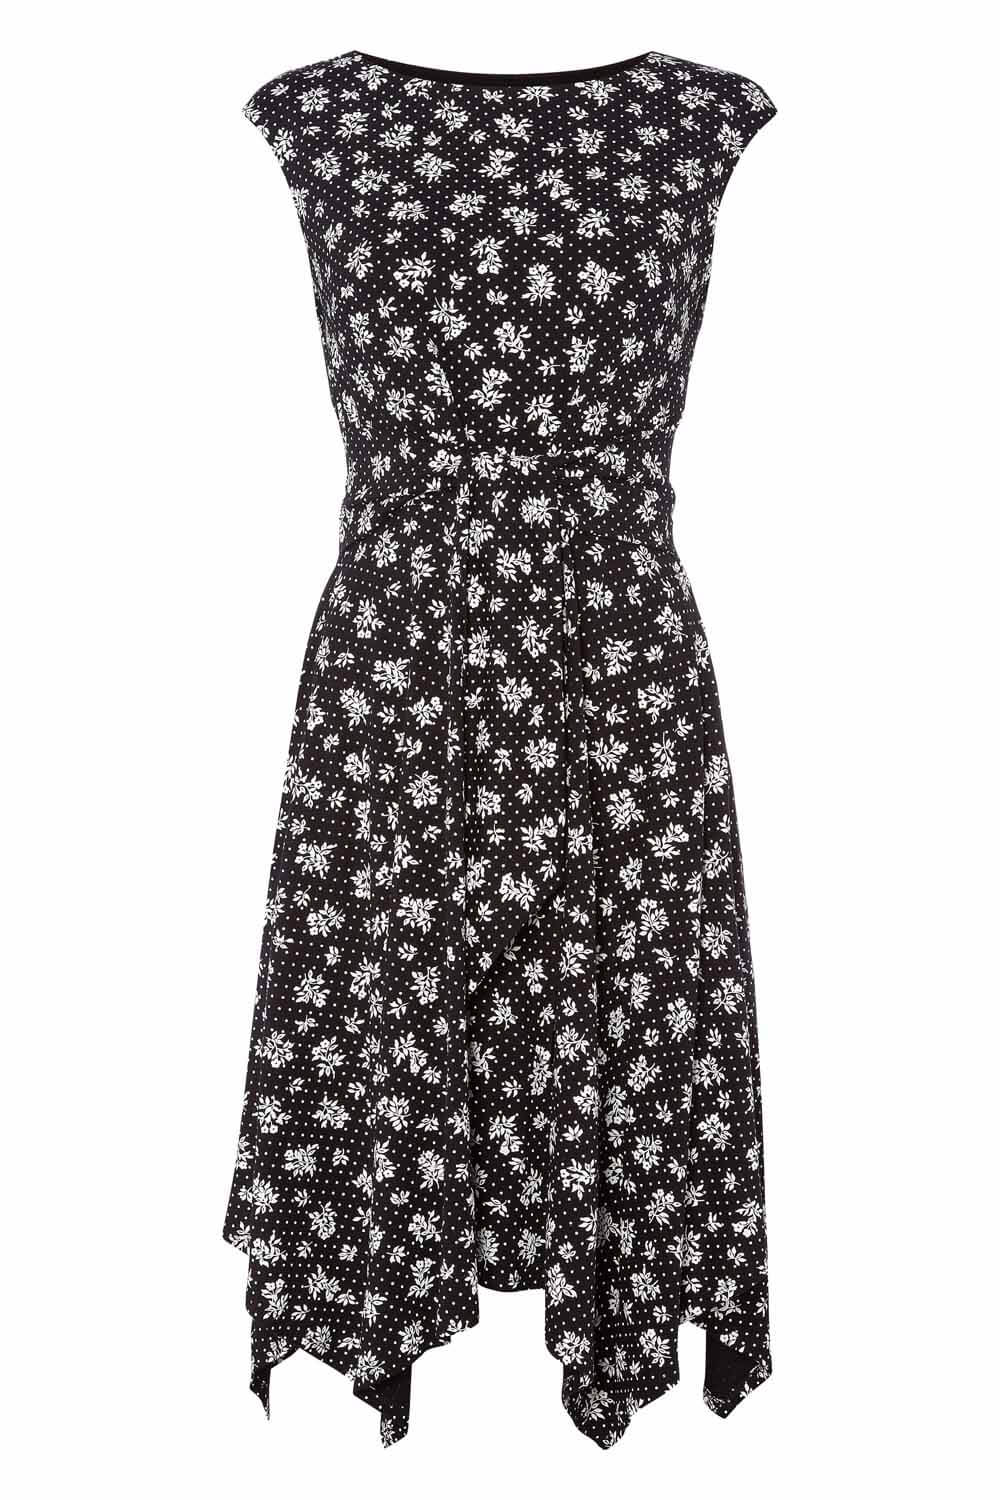 Black Floral Print Fit and Flare Dress, Image 4 of 4